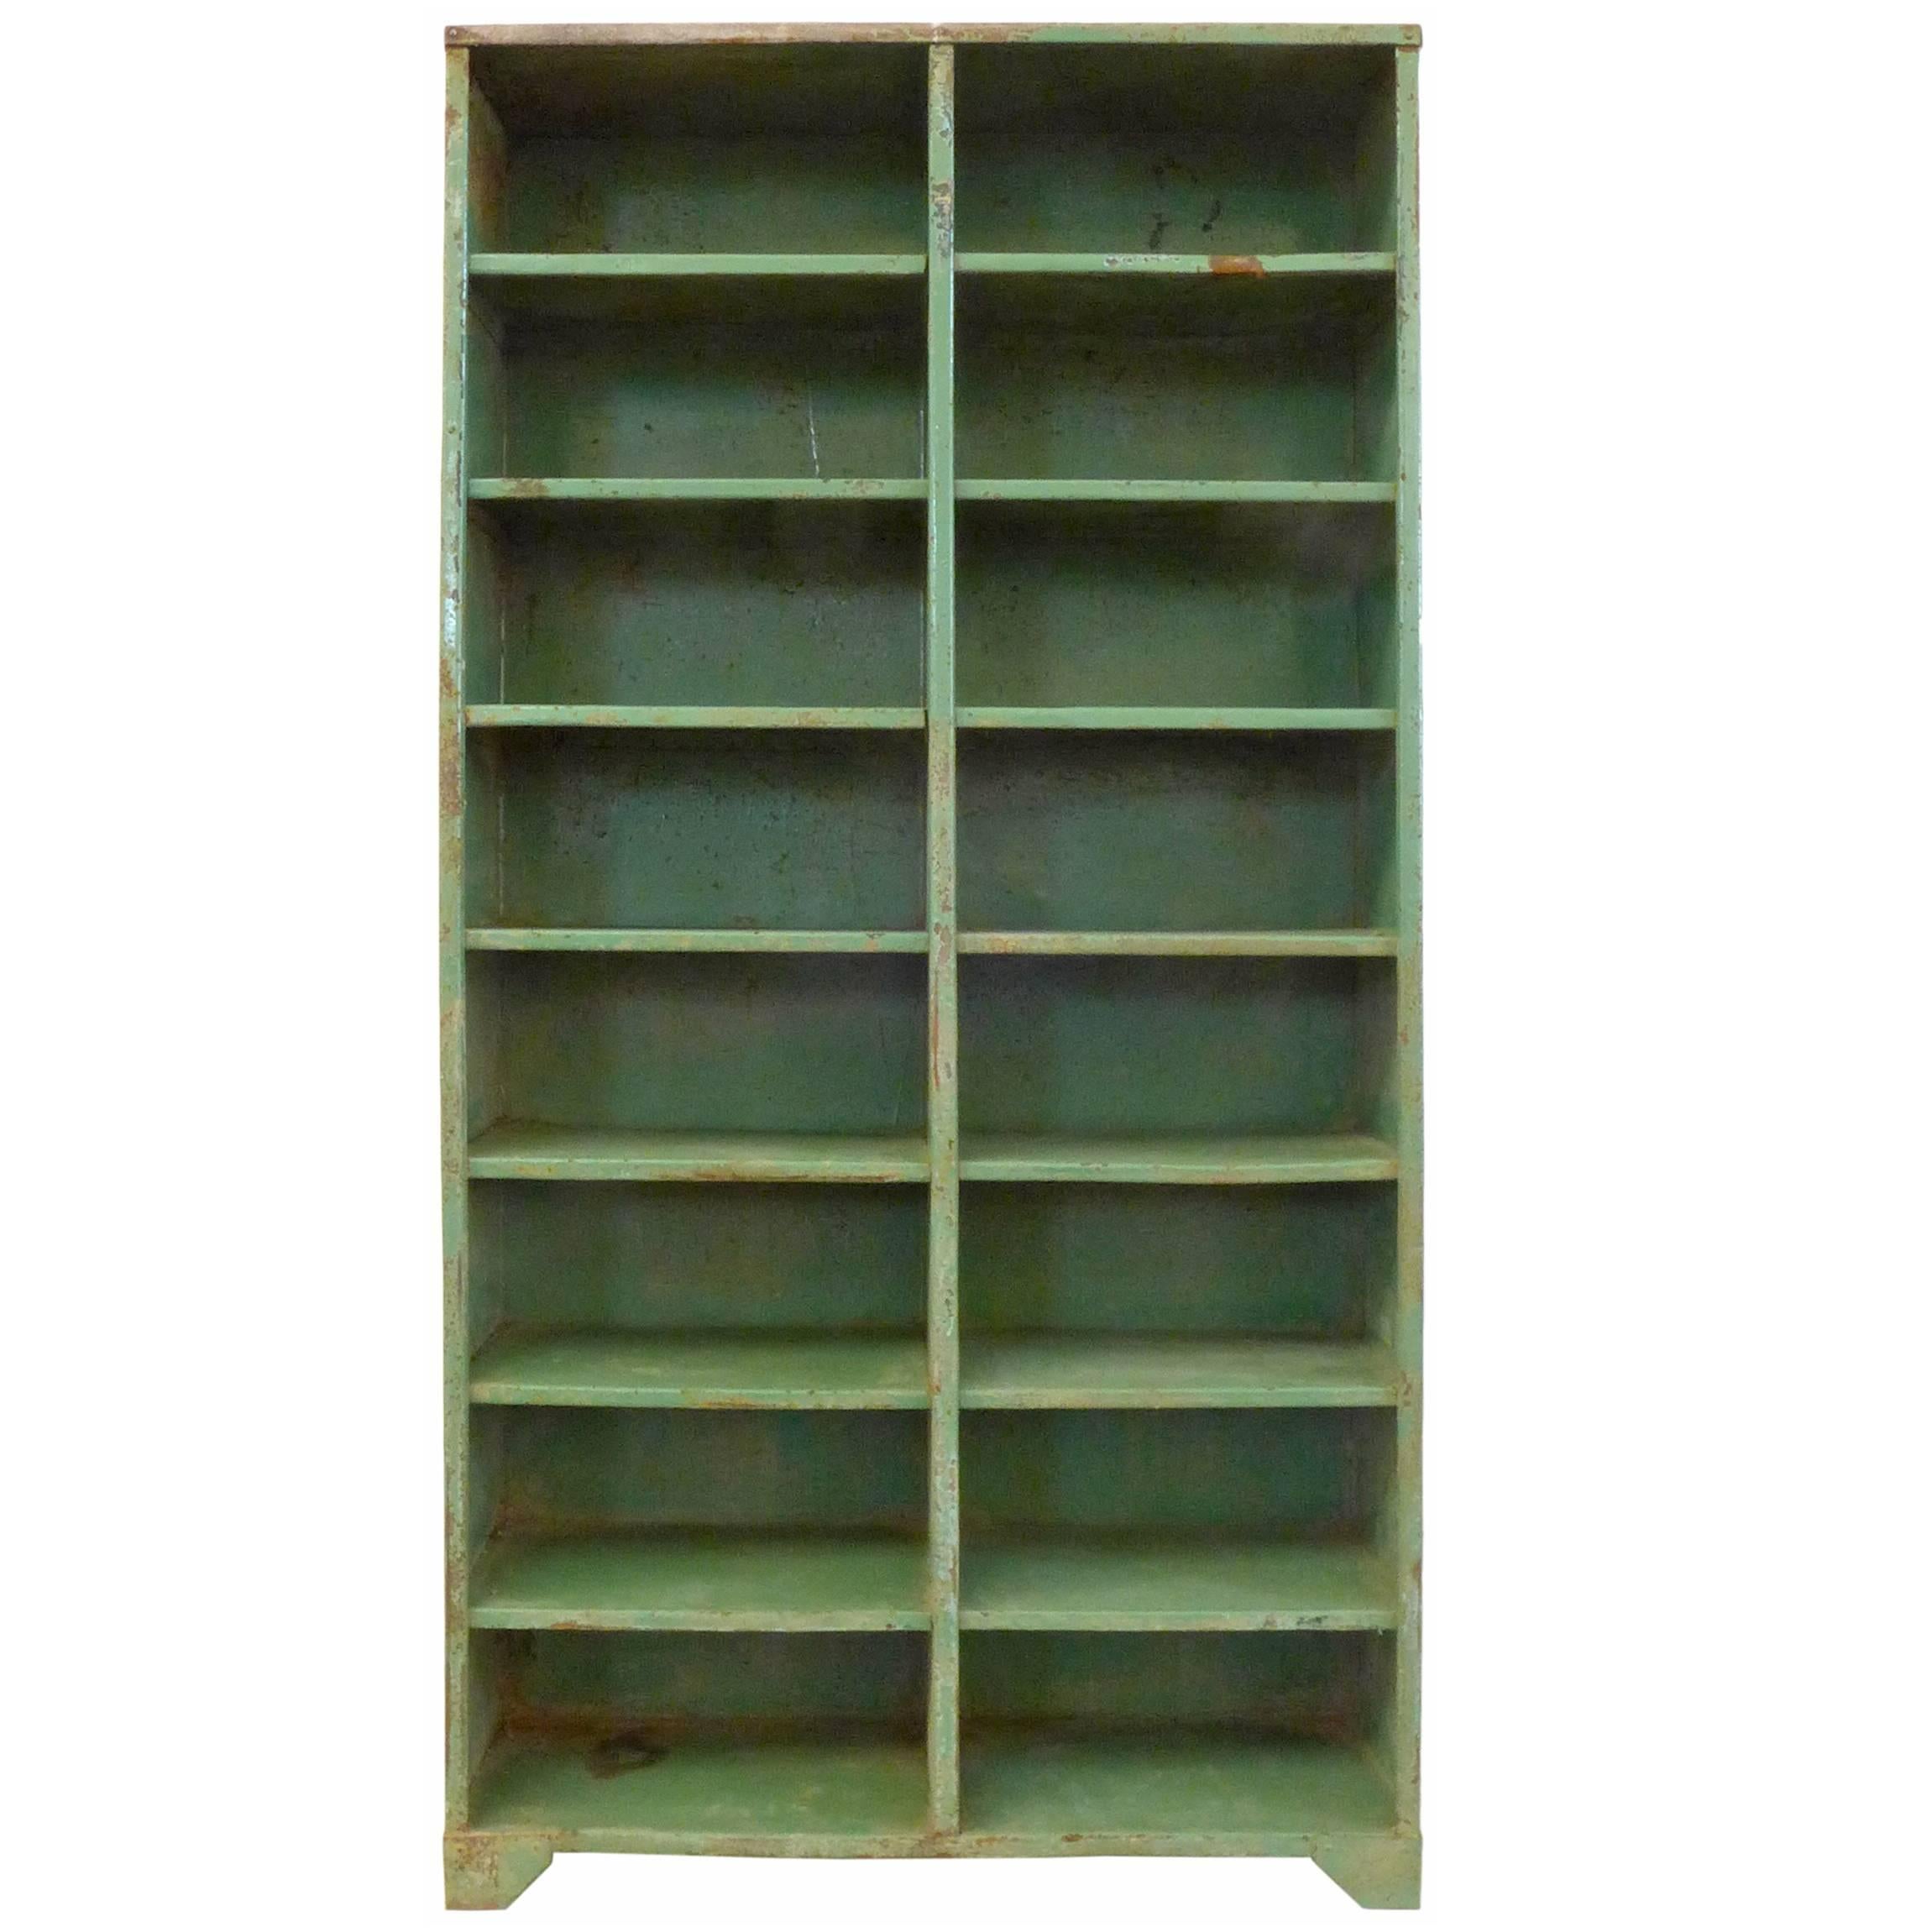 1930s French Industrial Shelving Unit For Sale